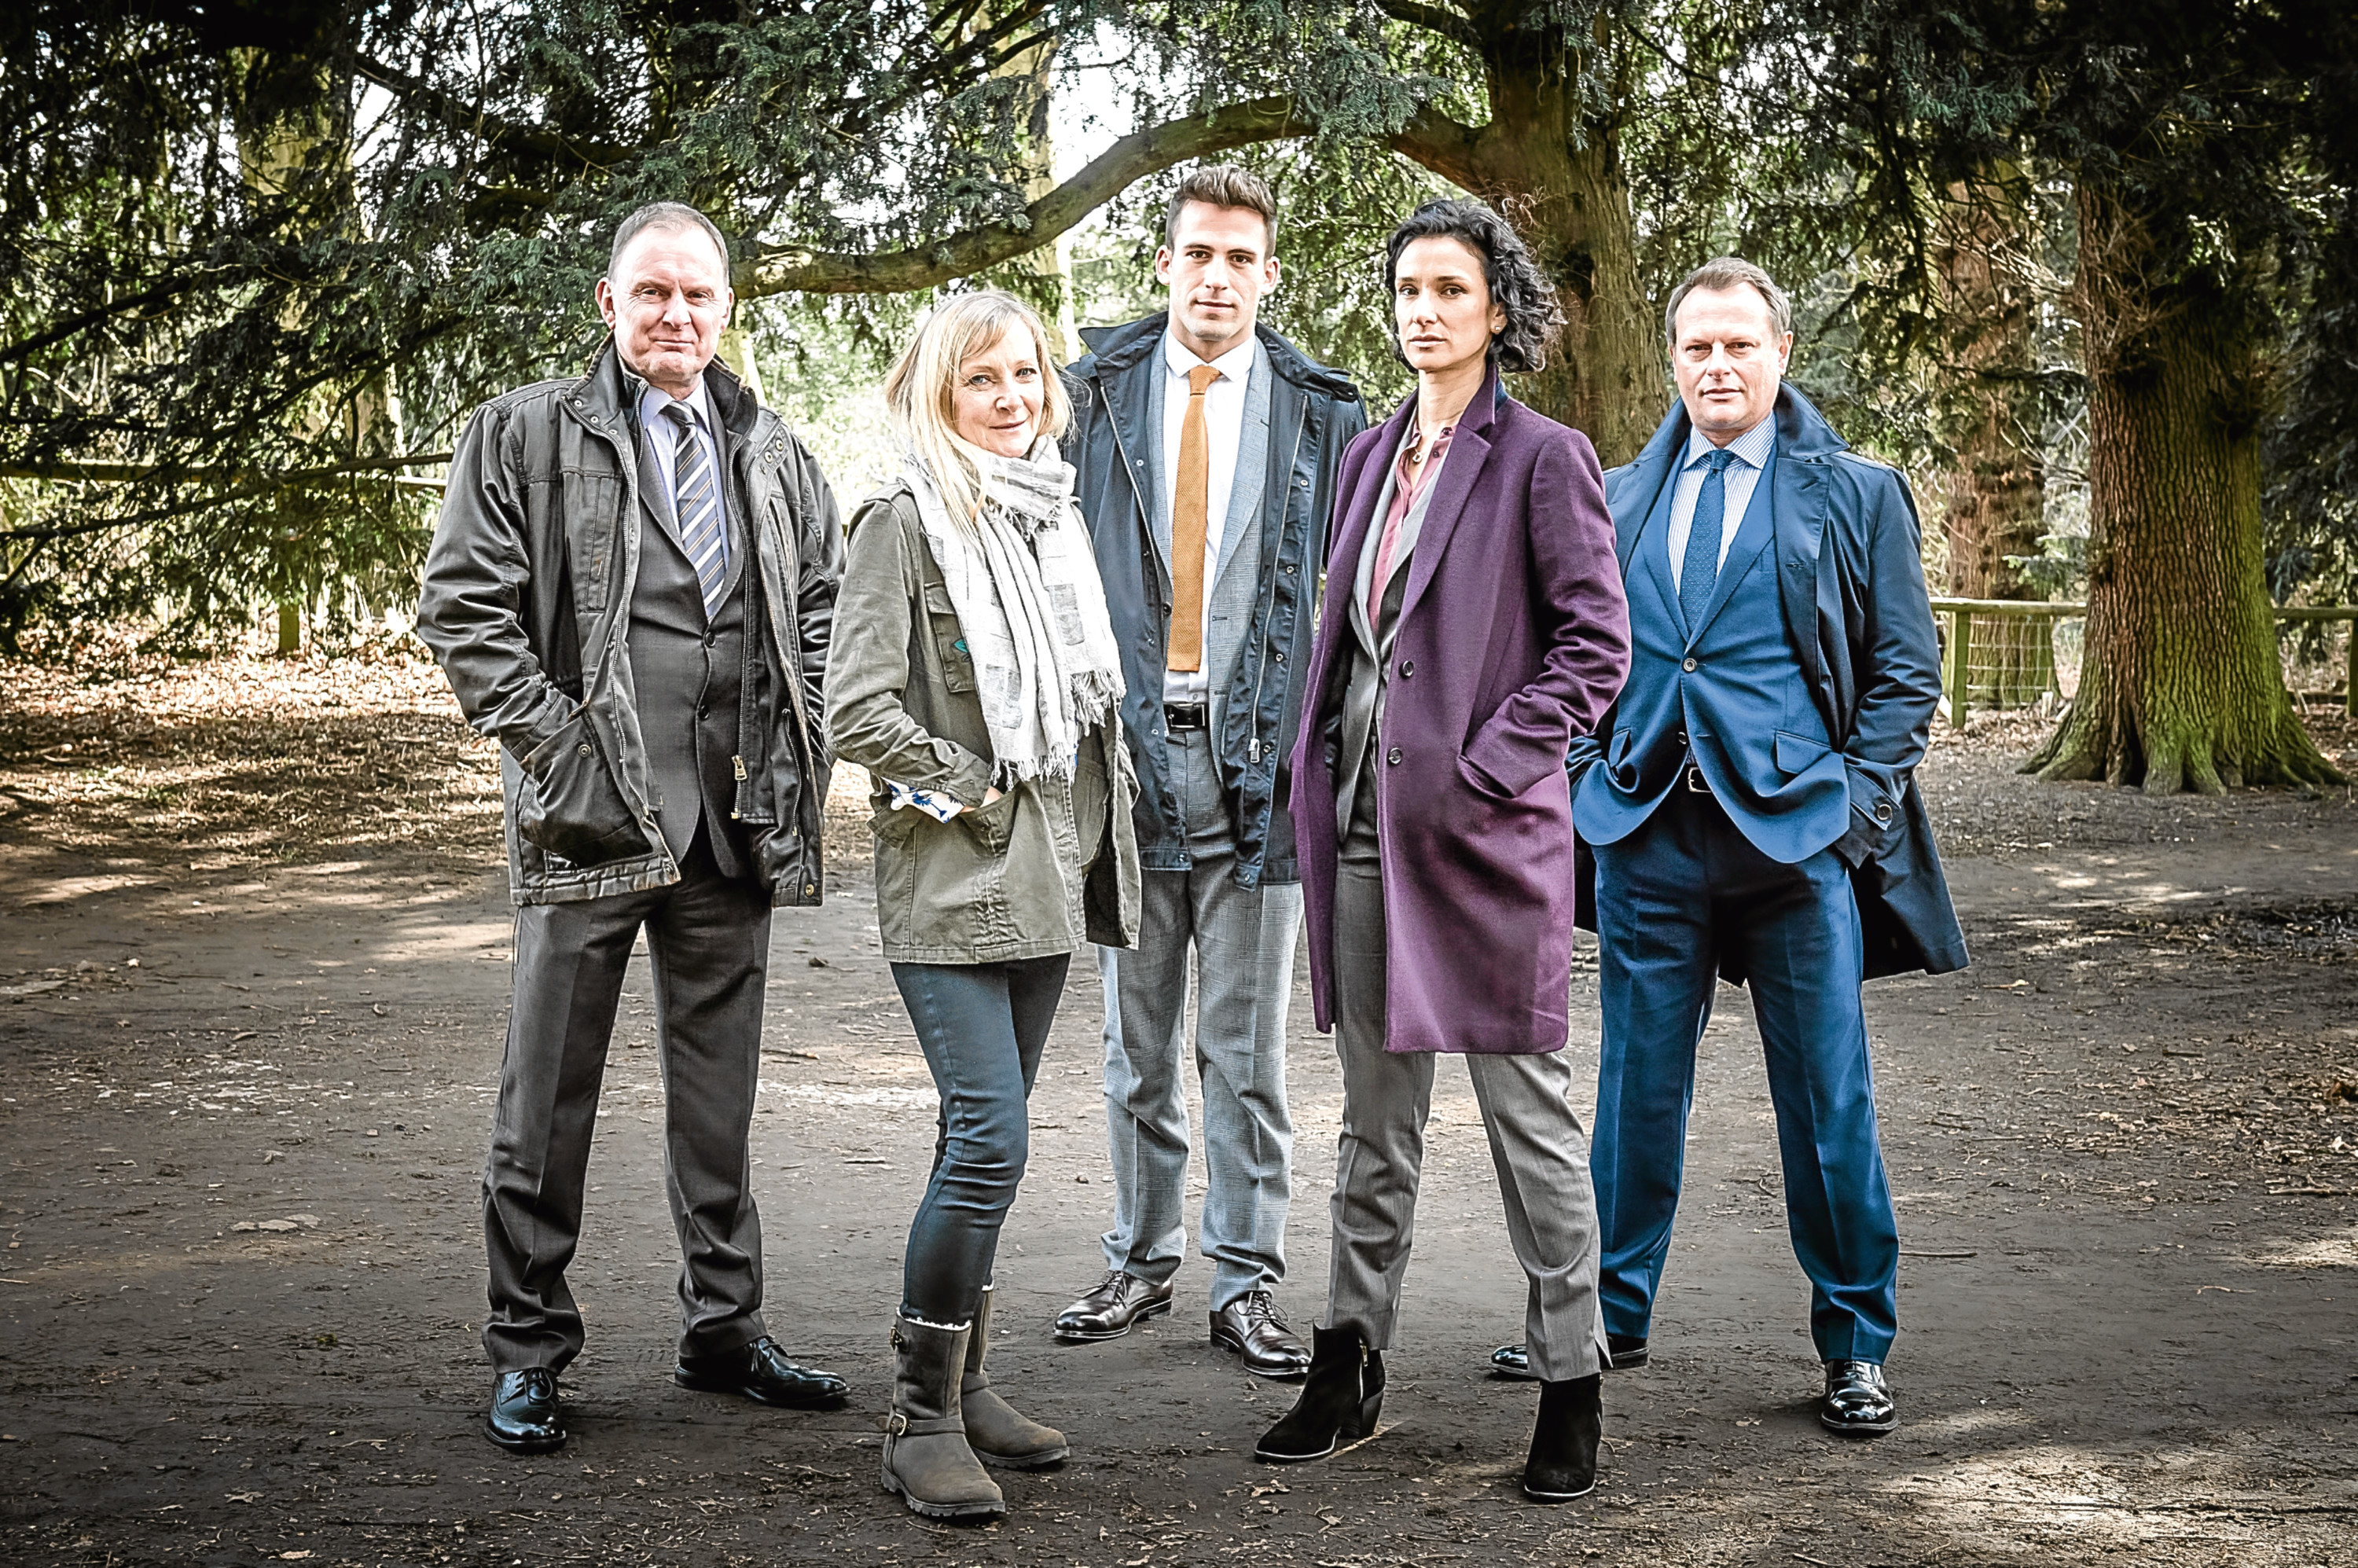 Pictured L-R: ROBERT GLENNISTER as Bobby Day, LESLEY SHARP as Lucy Cannonbury, DINO FETSCHER as Alec Wayfield, INDIRA VARMA as Nina Suresh and NEIL STUKE as Michael Niles
(Red Productions/ITV Plc)